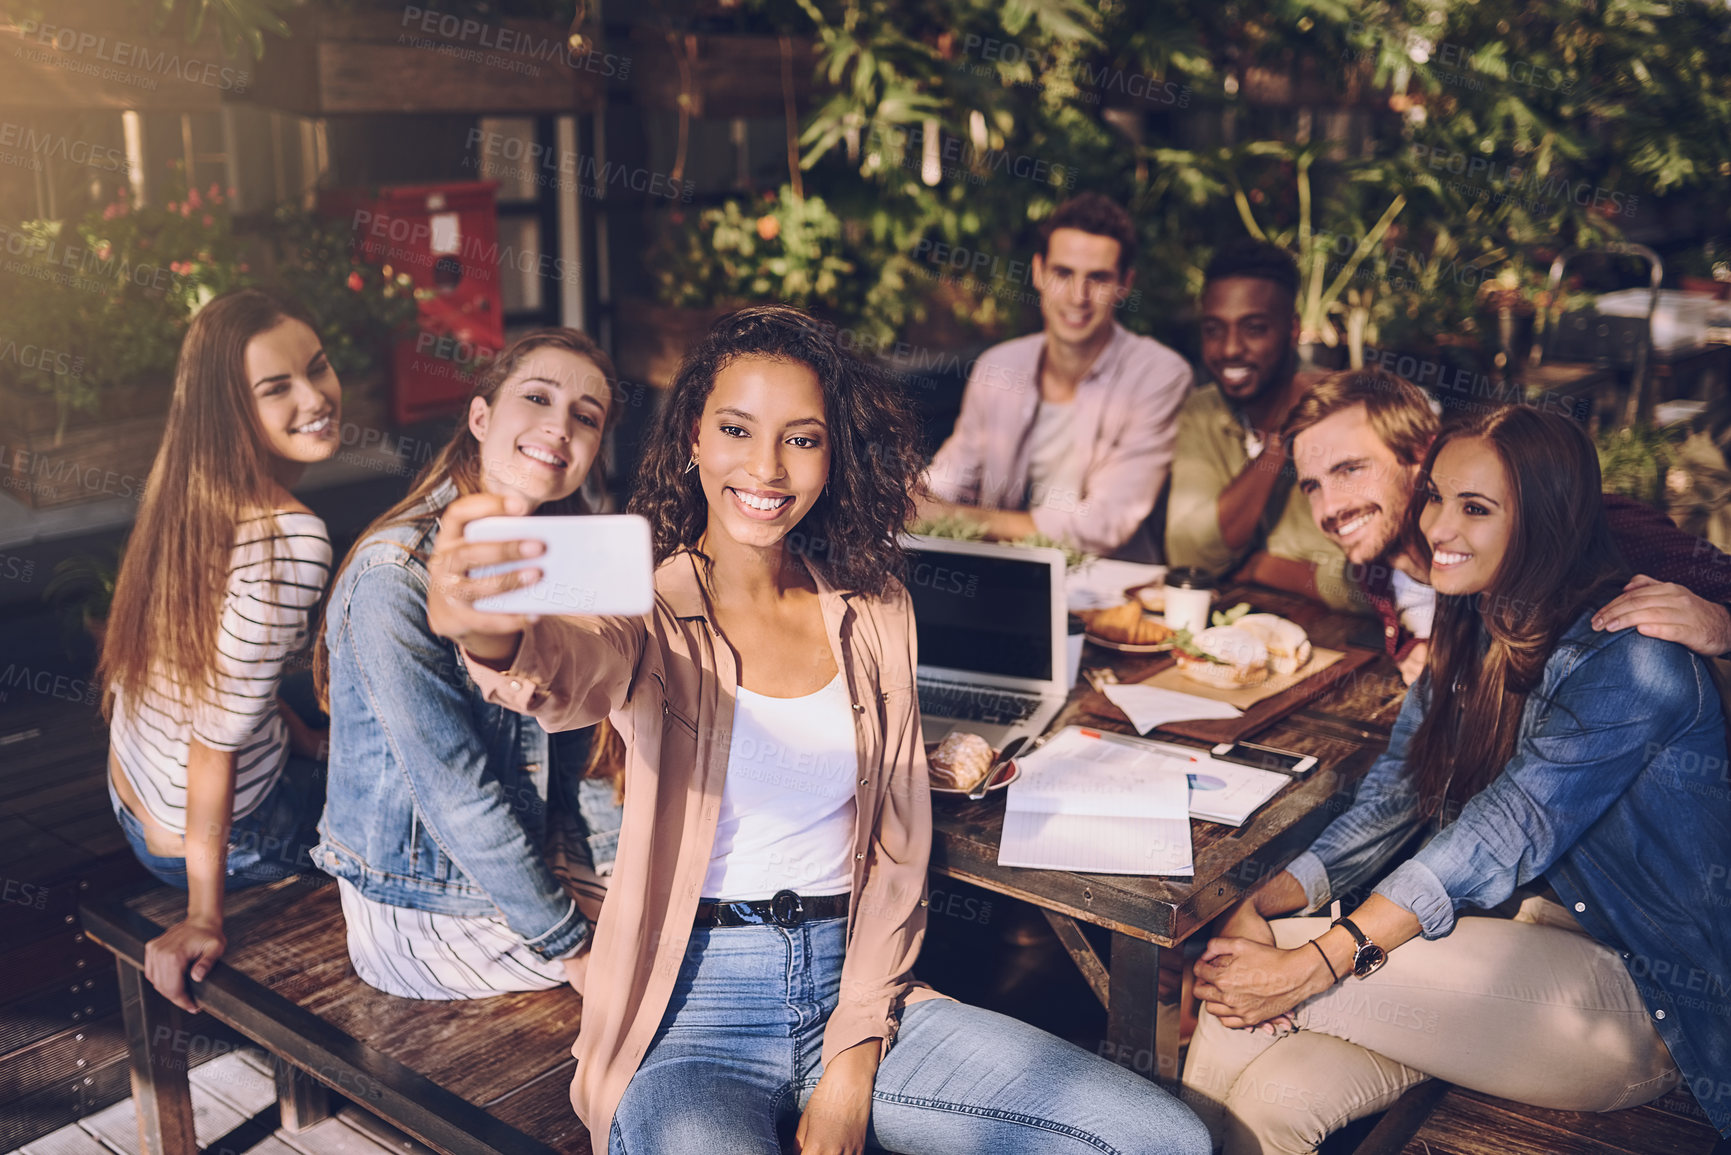 Buy stock photo Shot of a woman taking a selfie with her colleagues while out for lunch